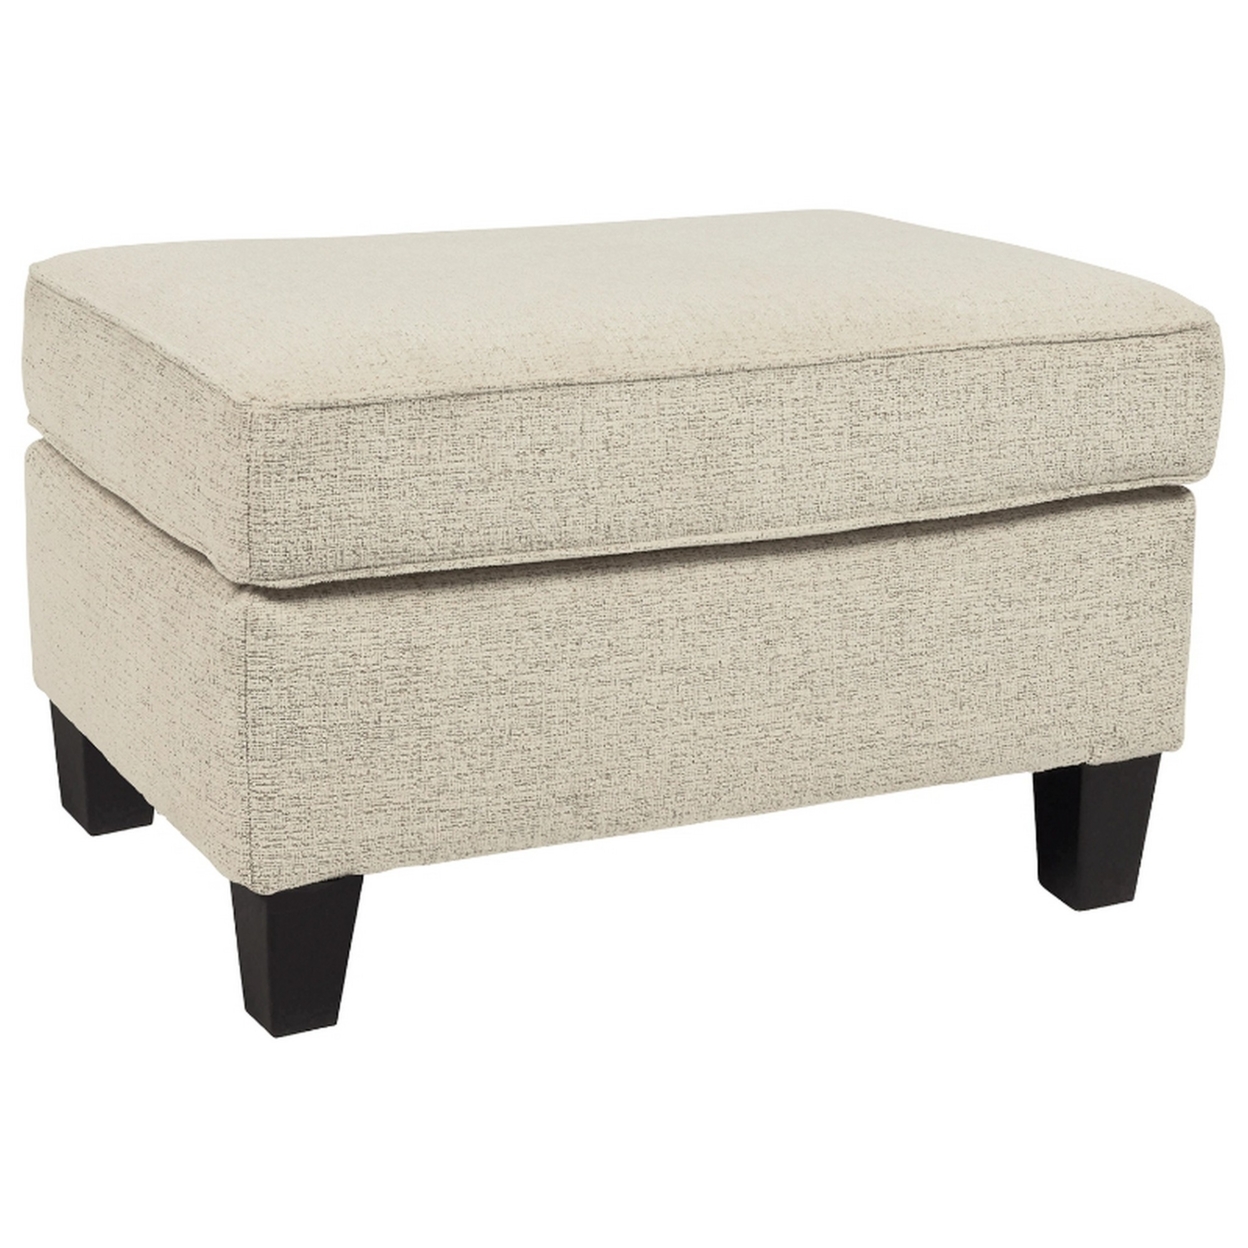 Ottoman With Fabric Upholstery And Tapered Legs, Beige- Saltoro Sherpi